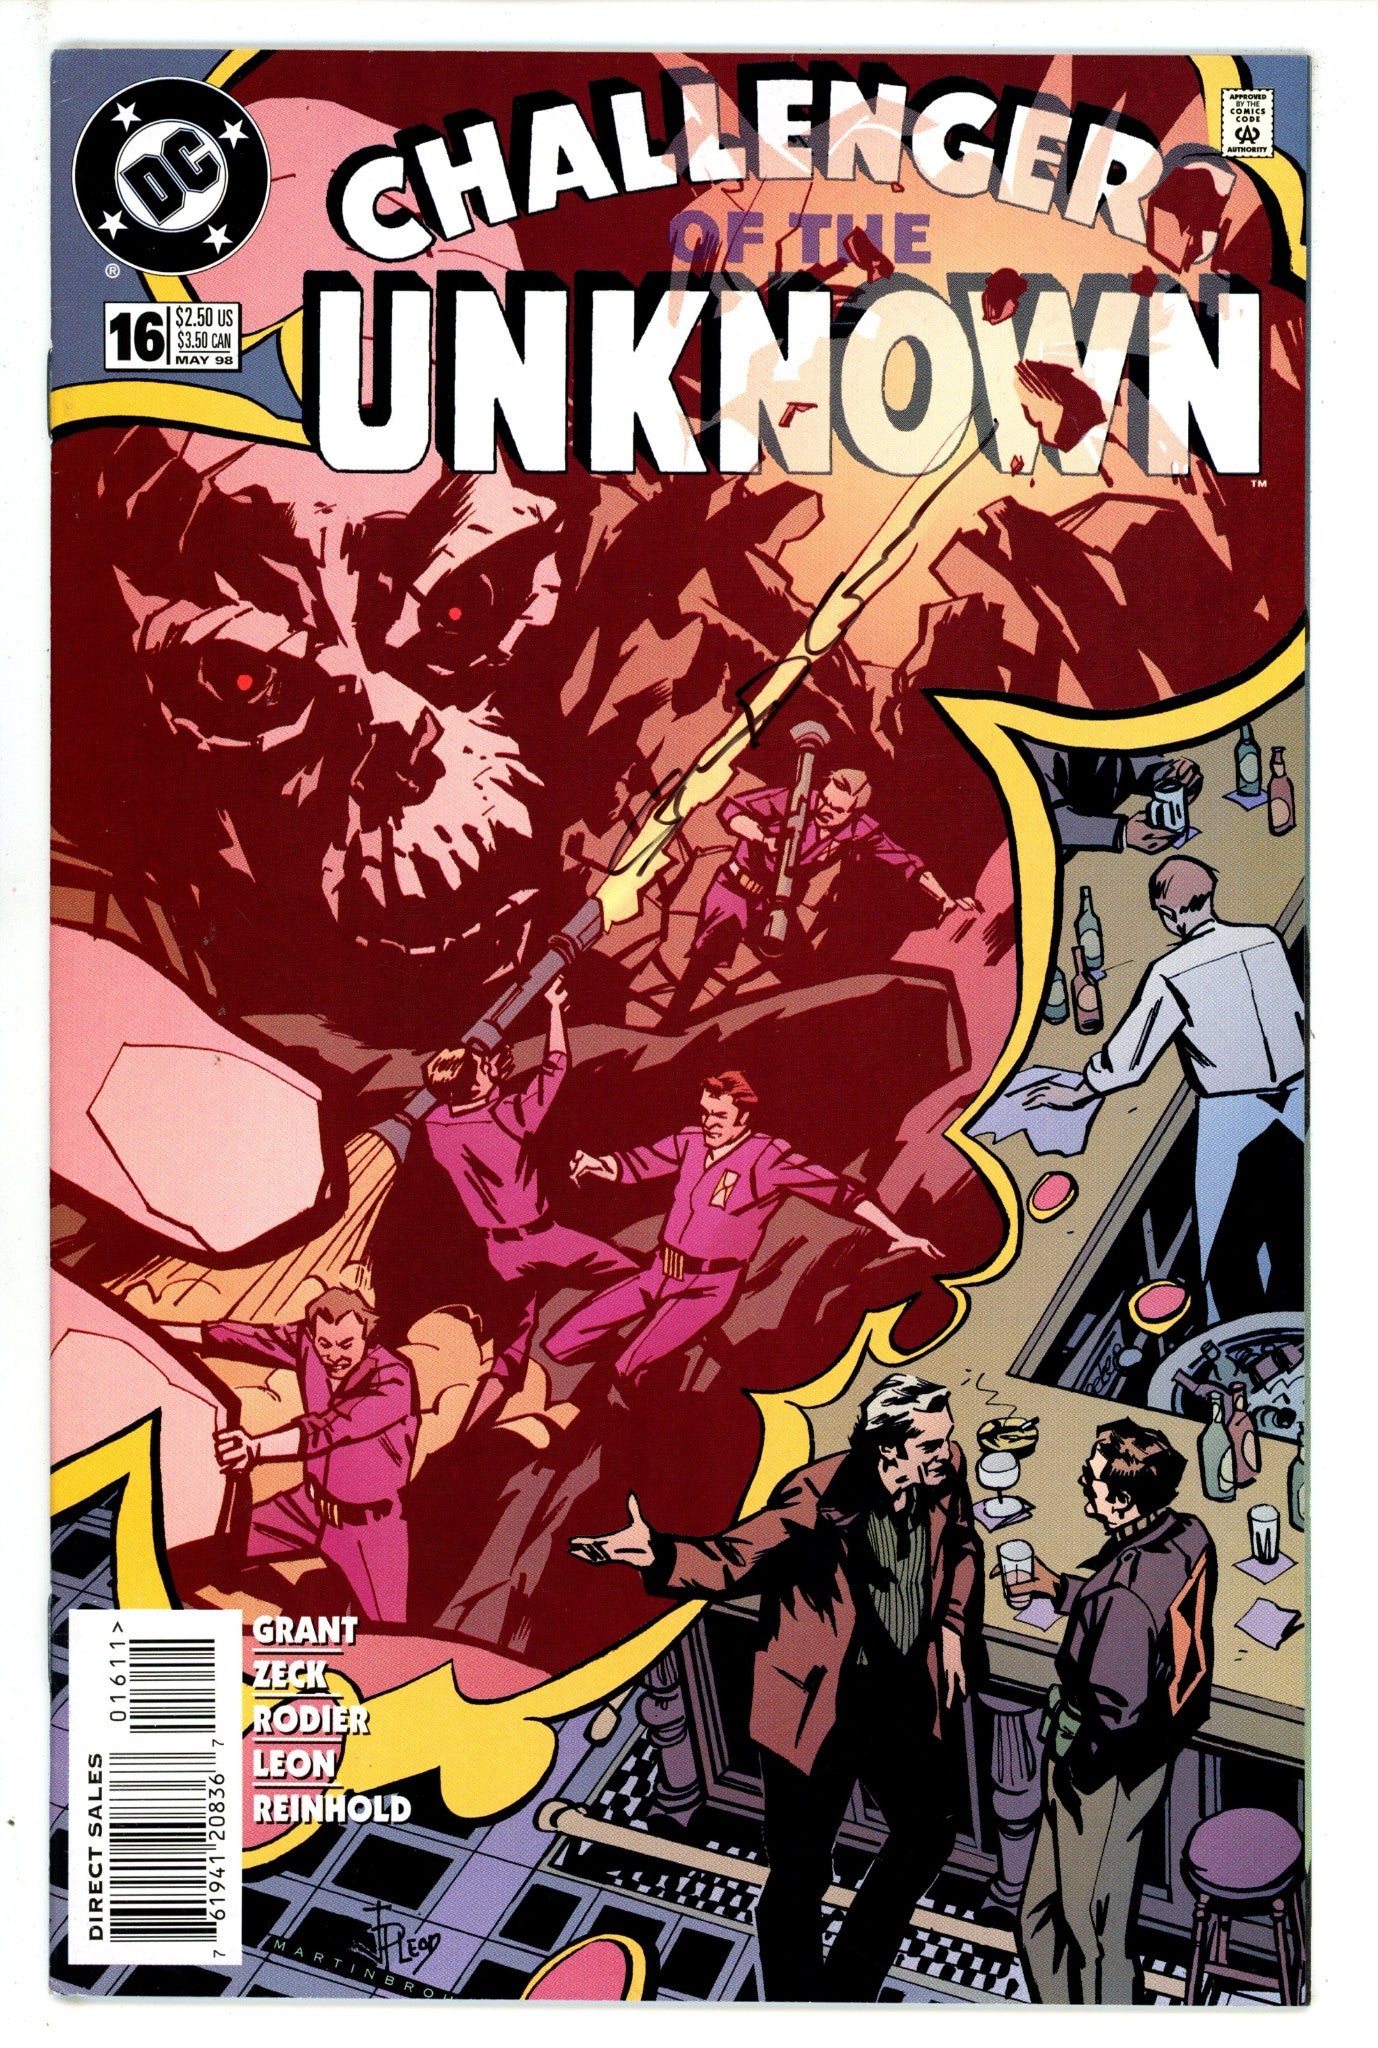 Challengers of the Unknown Vol 3 16 (1998)